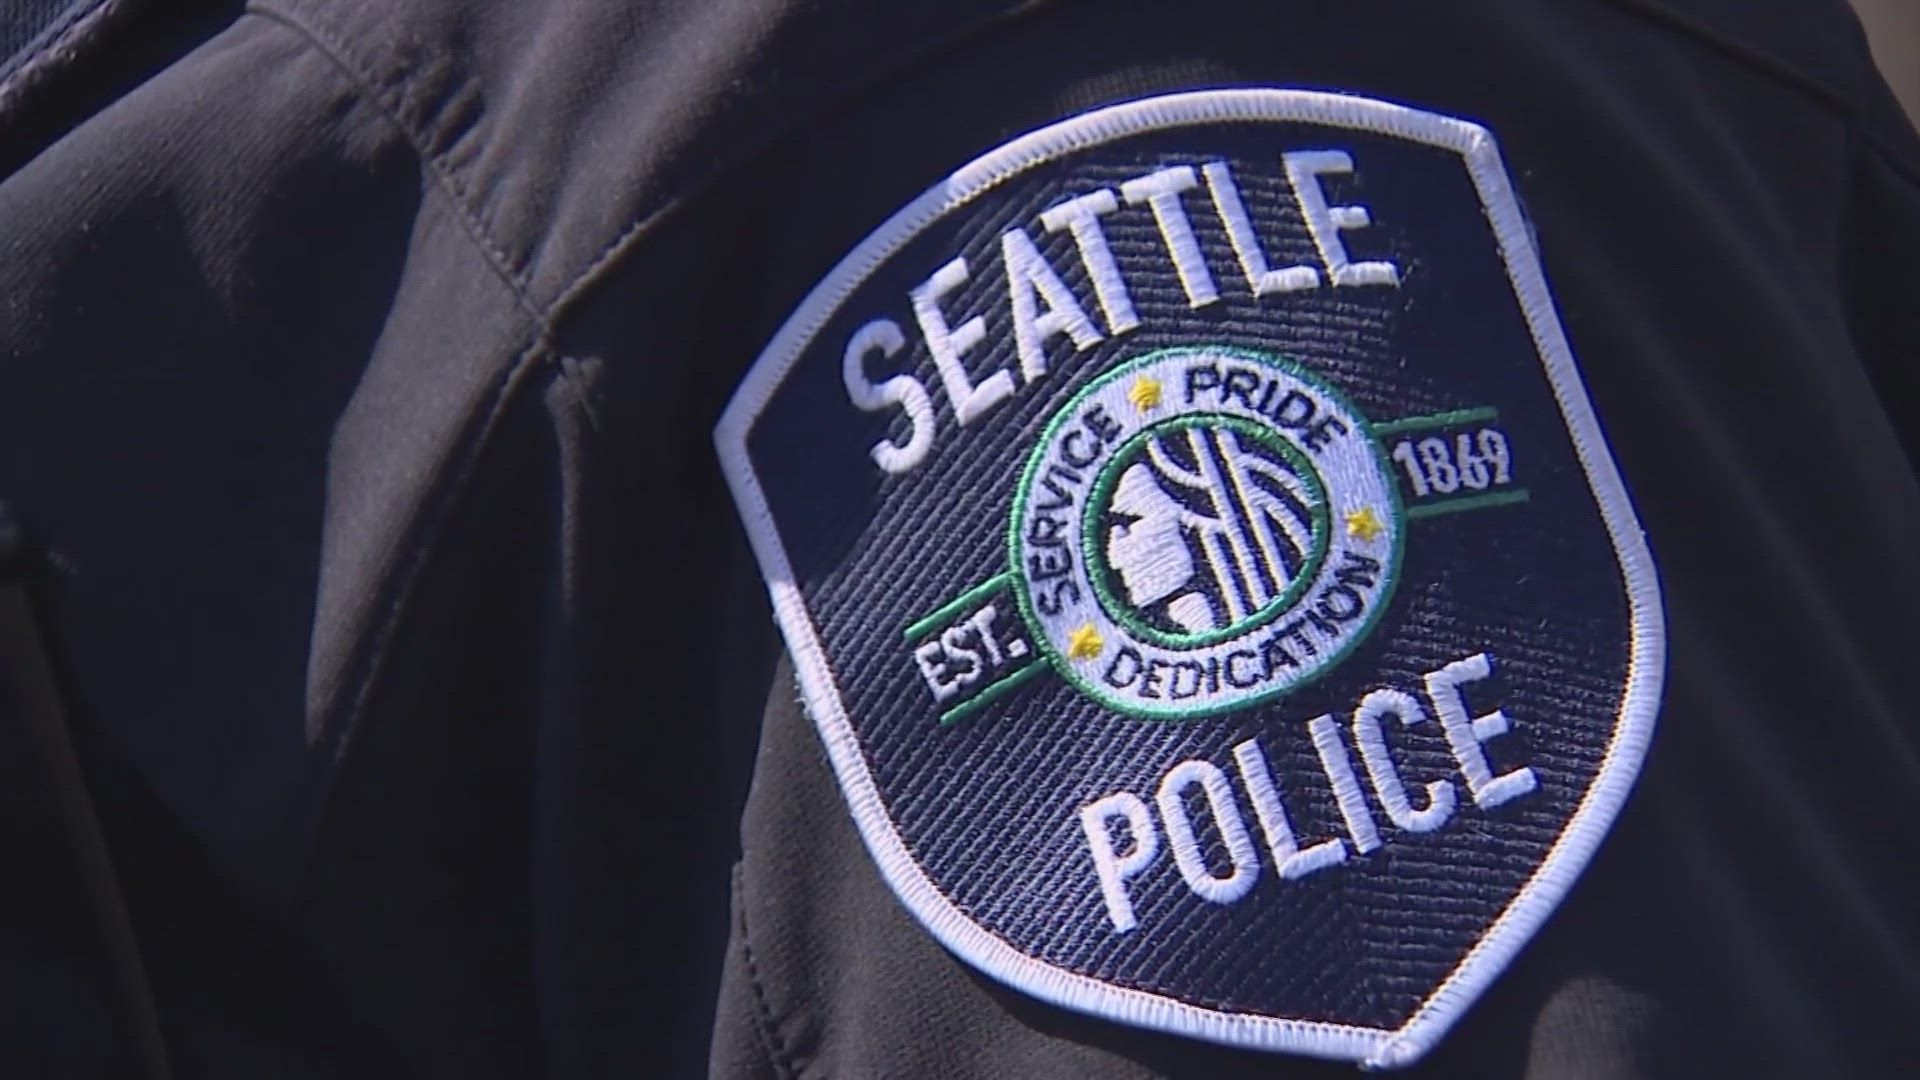 Seattle PD has lost staff for the past five years straight